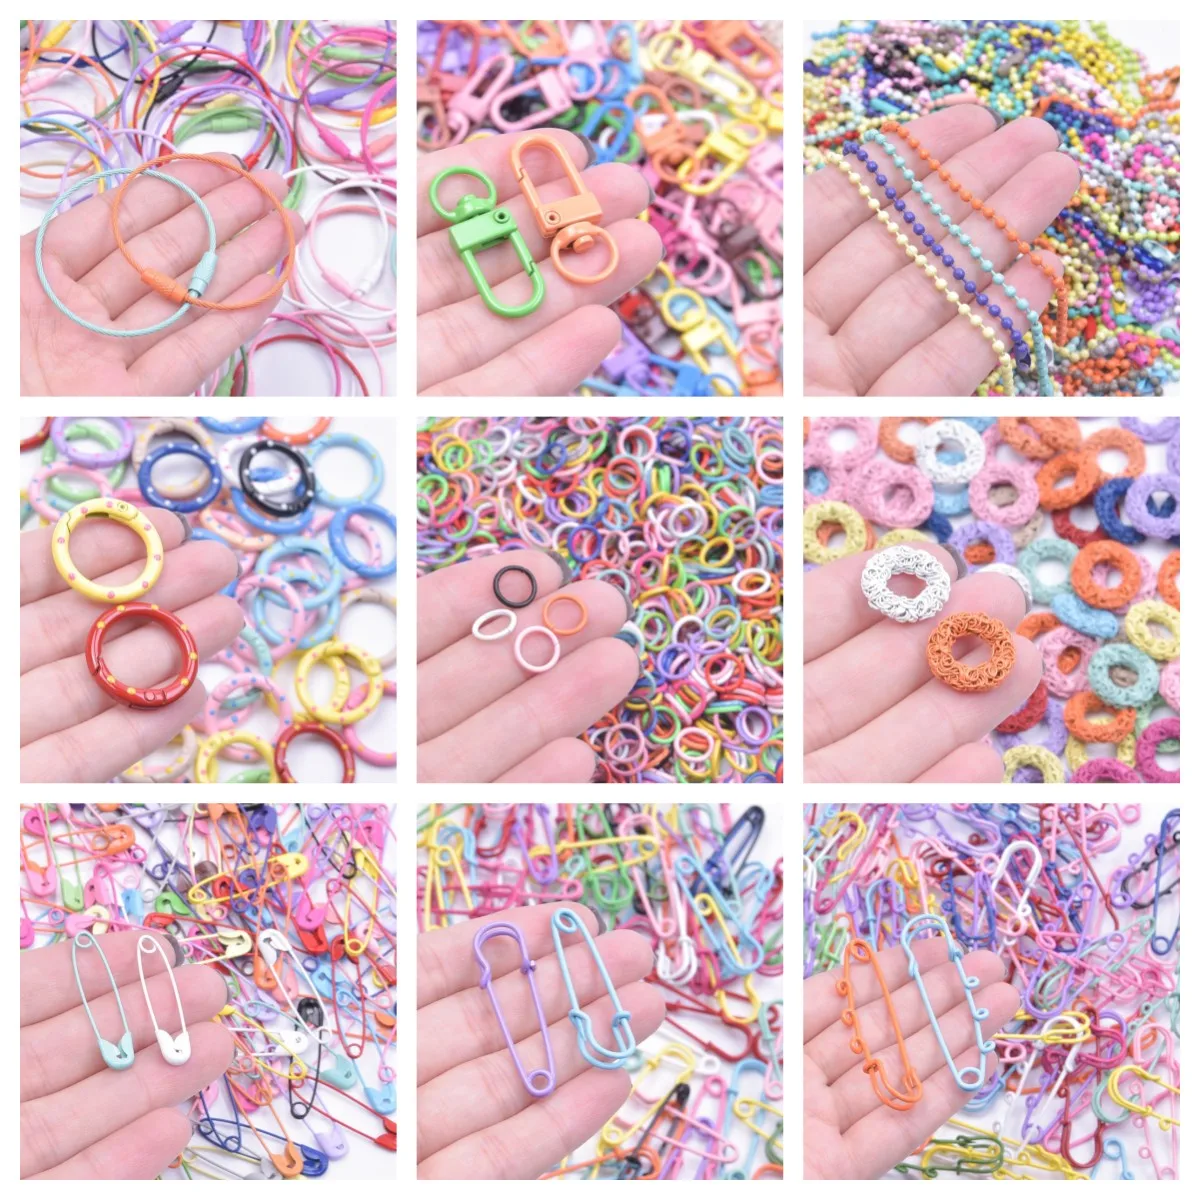 

10pcs Colored Paint Bead Chain/Safety Pins Rainbow Fashion Jewelry Findings DIY For Making Keychain Bracelet Handmade Accessory